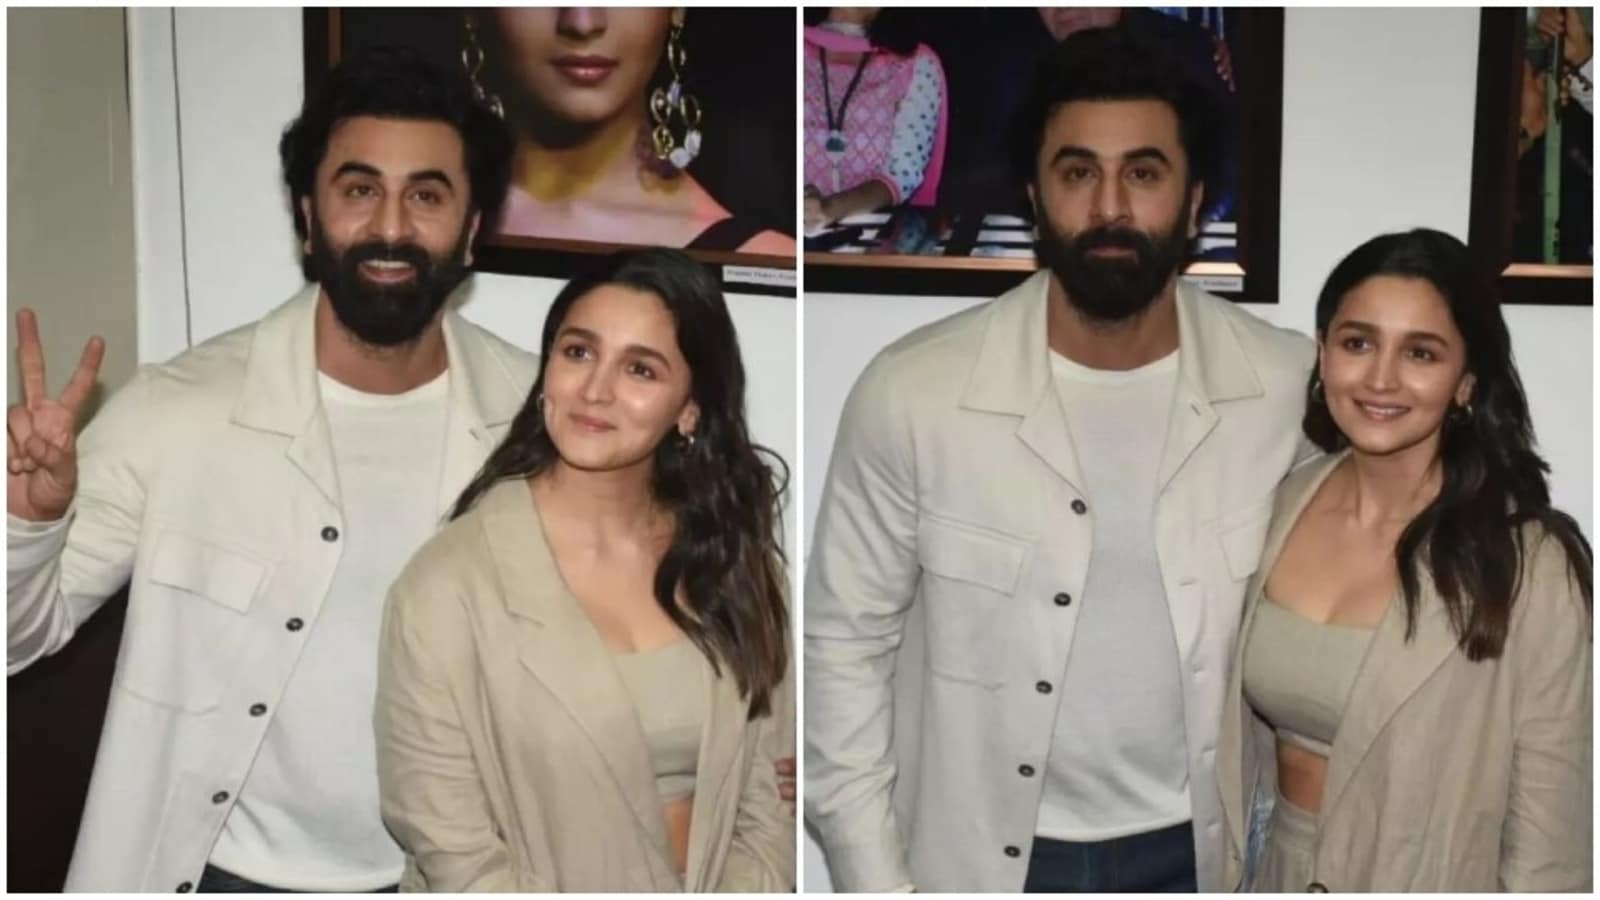 Alia Bhatt makes effortless styling look easy in chic powersuit with Ranbir  Kapoor at Mumbai event: All pics, videos | Fashion Trends - Hindustan Times